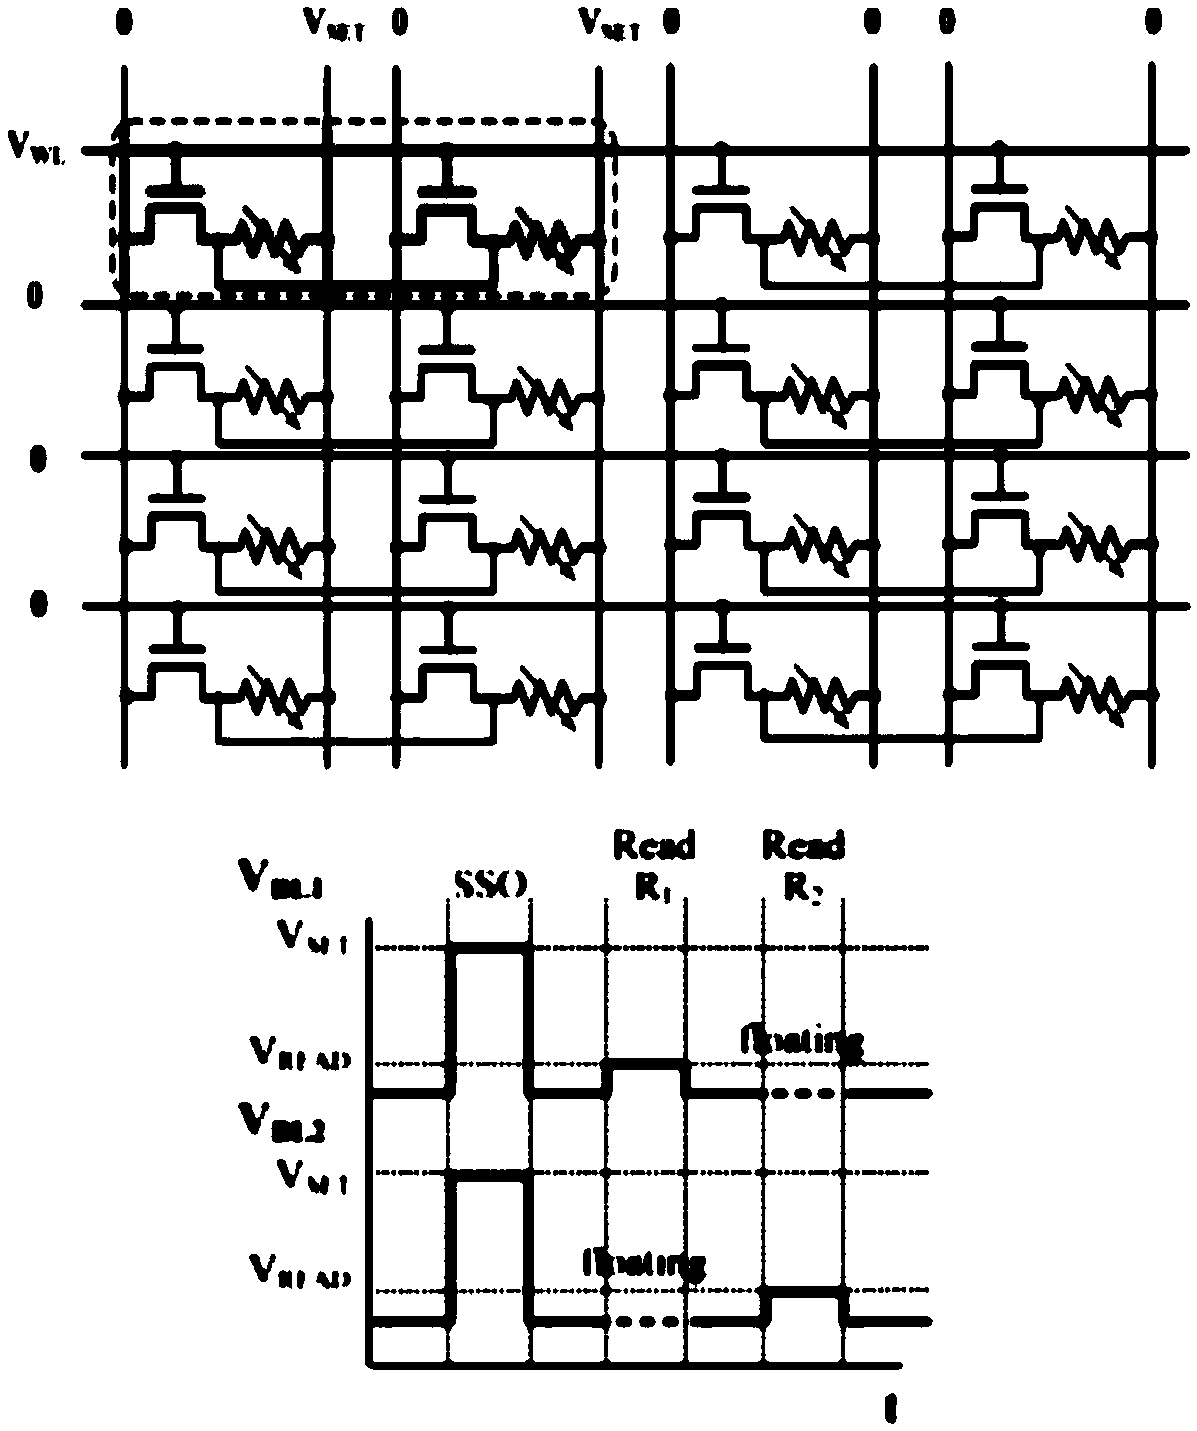 Strong physically unclonable function (PUF) circuit based on memristor